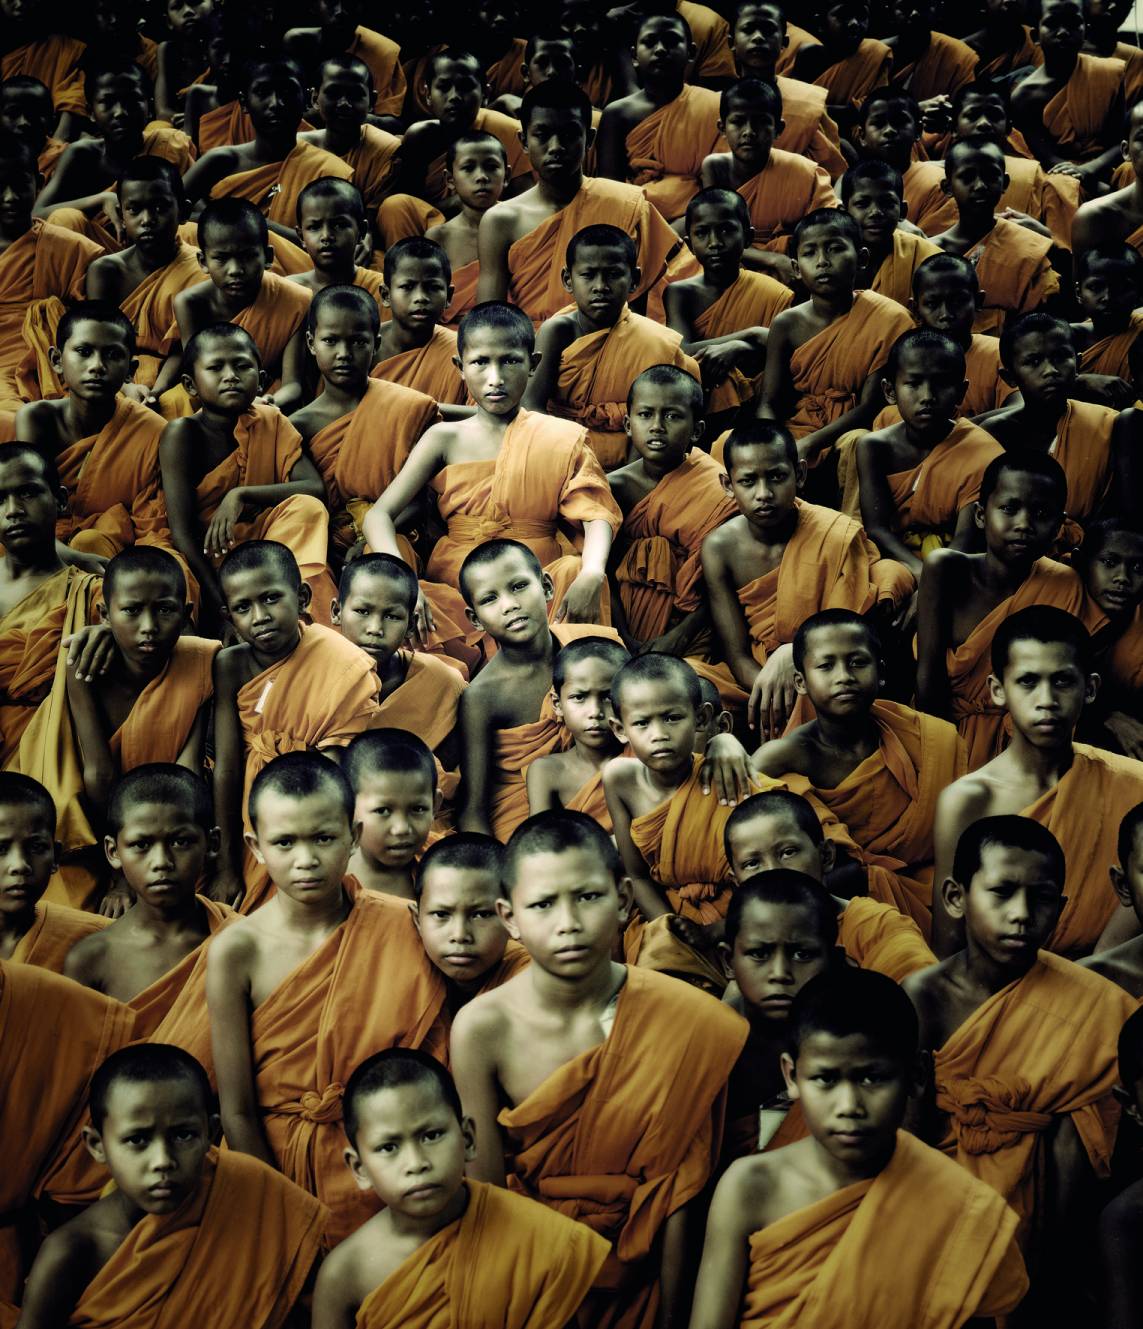 Stunning Photographs Of The World's Last Indigenous Tribes - BUDDHIST MONKS